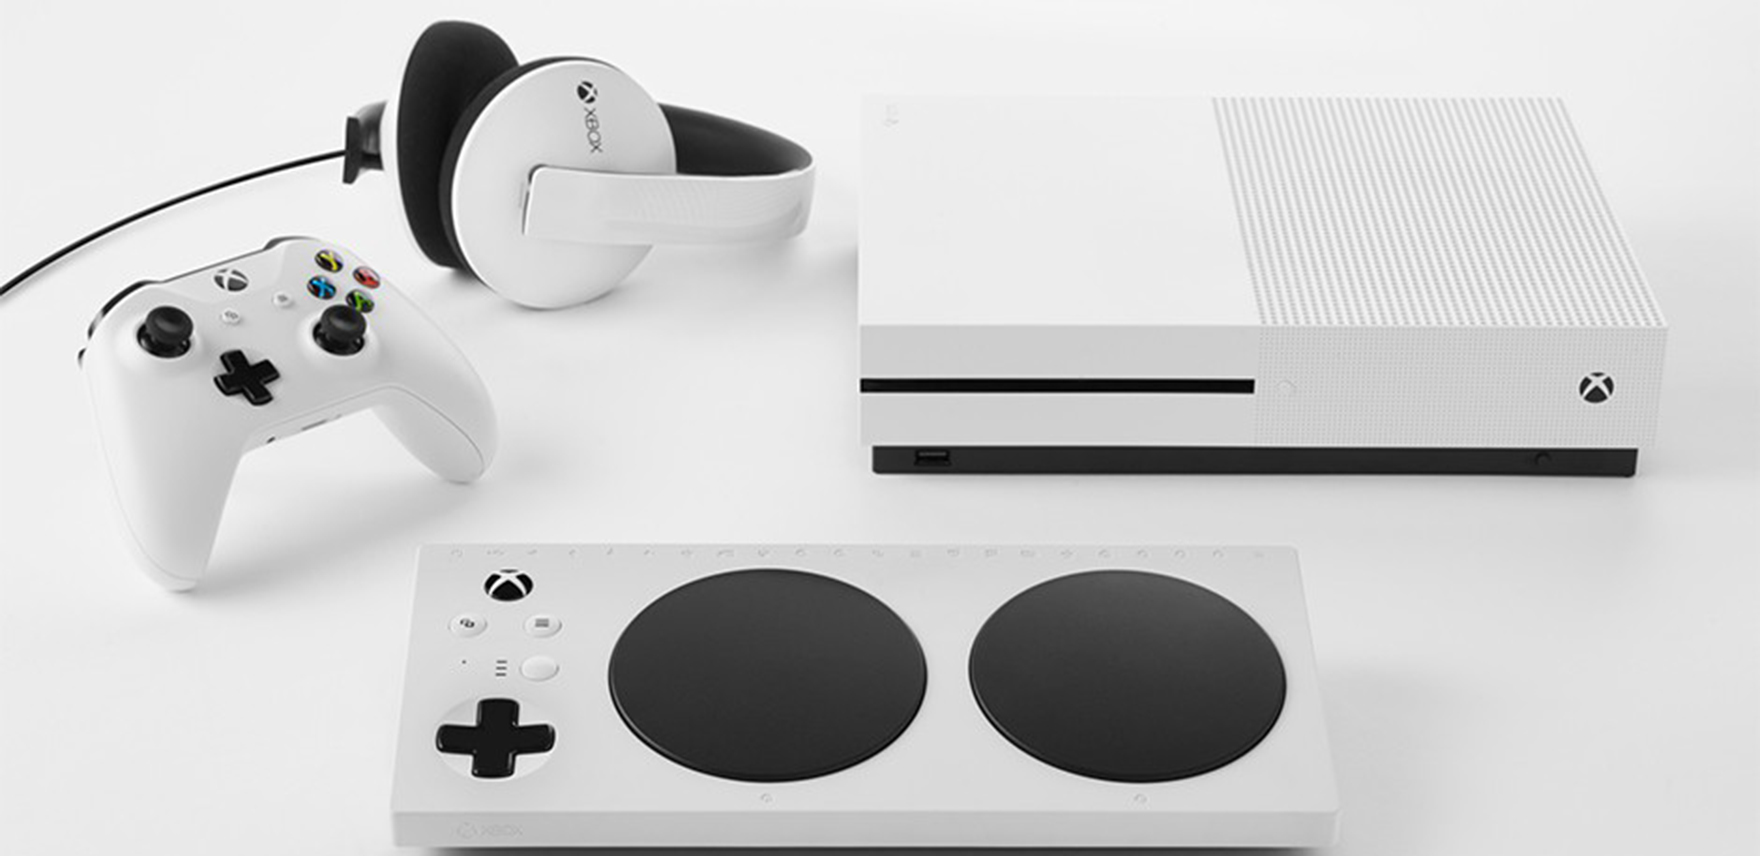 Photo of white Xbox Adaptive Controller, Xbox One X console, Xbox controller and headphones